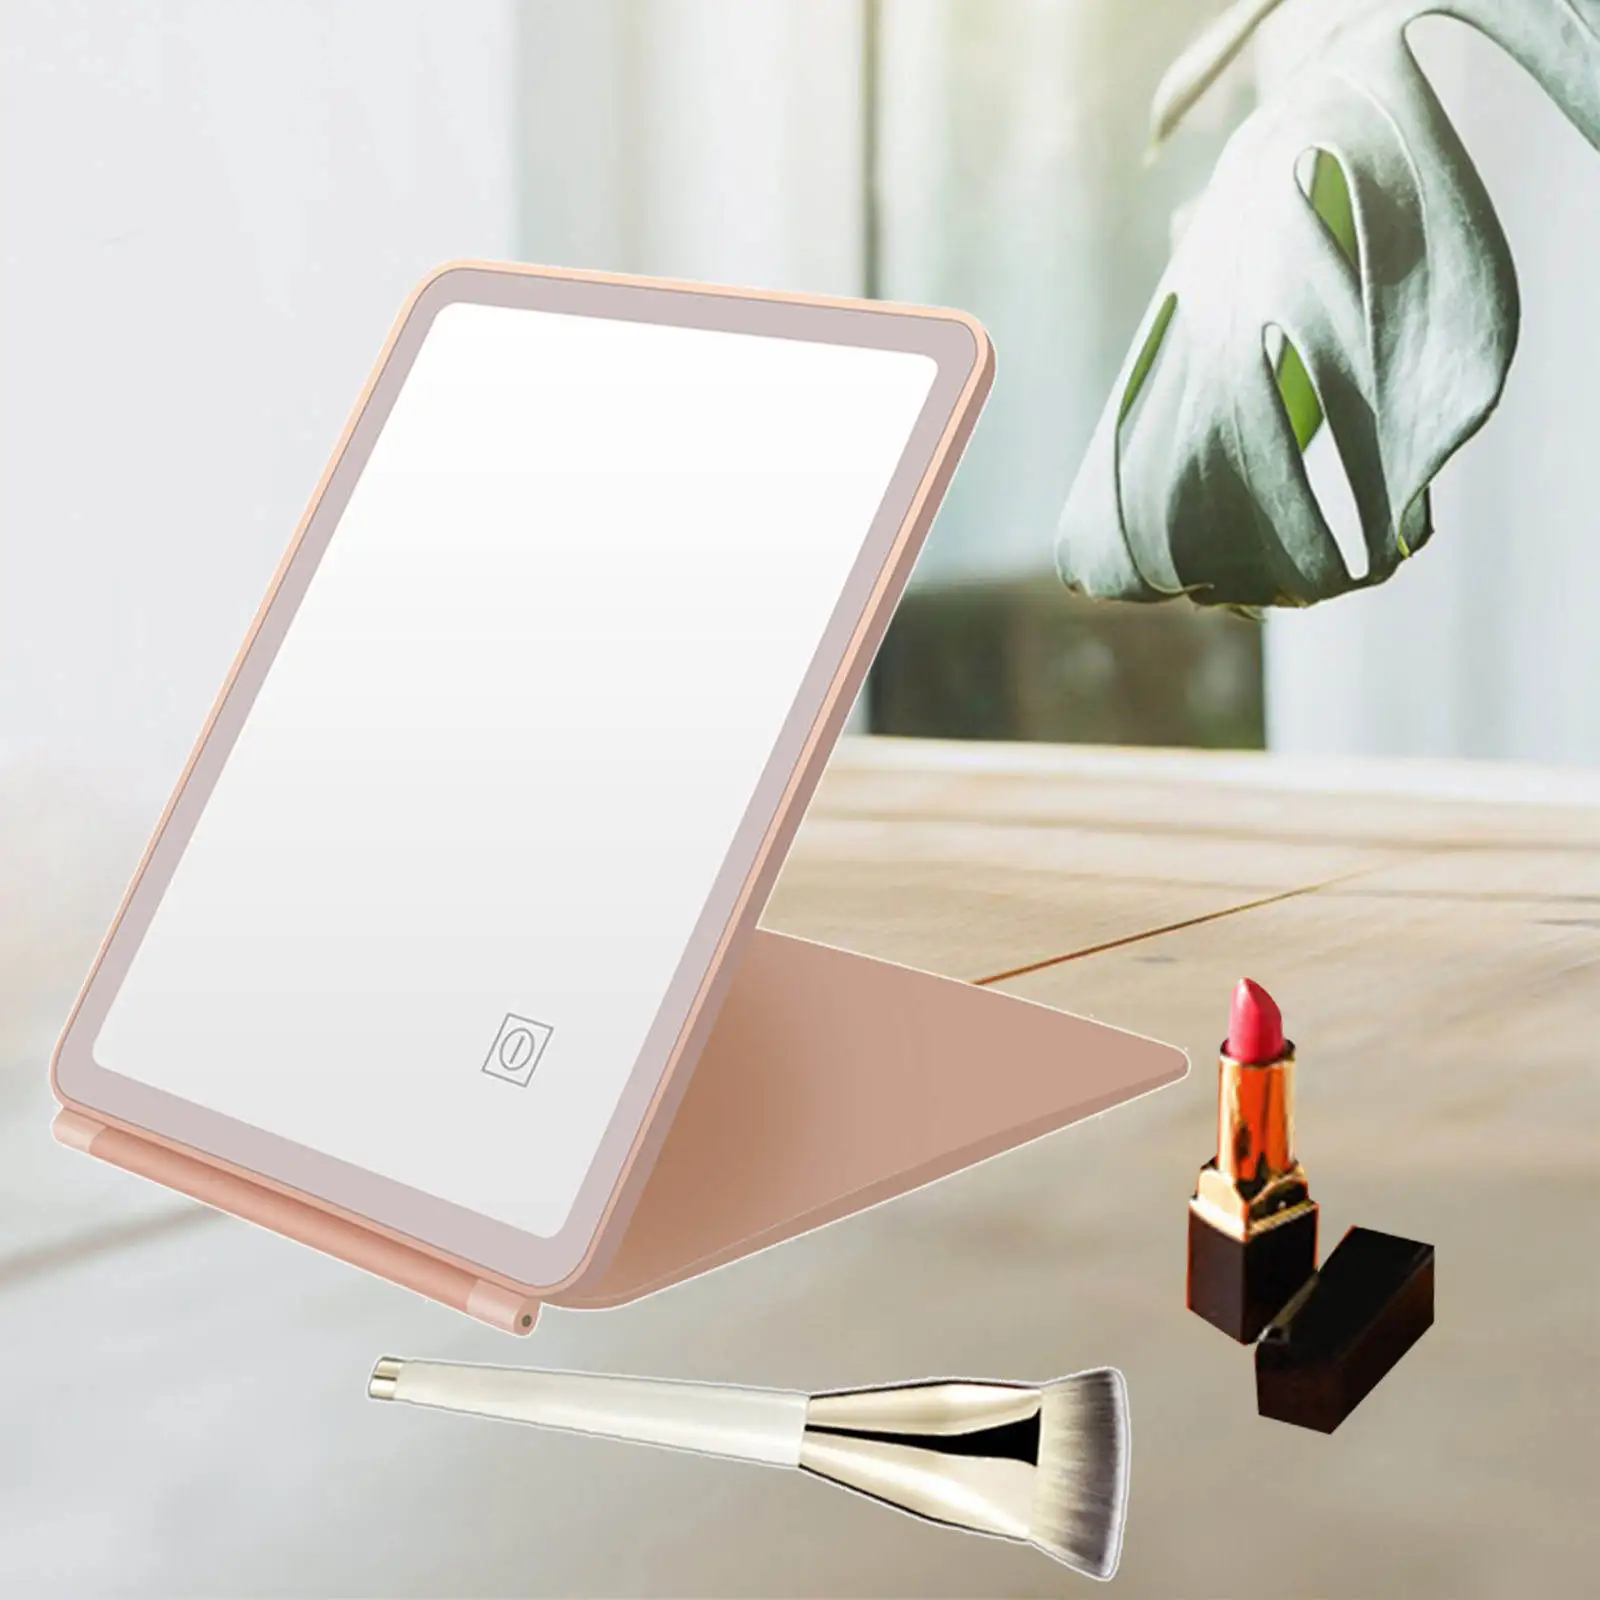 Folding LED Makeup Mirror 120 Adjustable Touch Switch Lighted Makeup Vanity Mirror for Cosmetic Gift Women Makeup Home Beauty